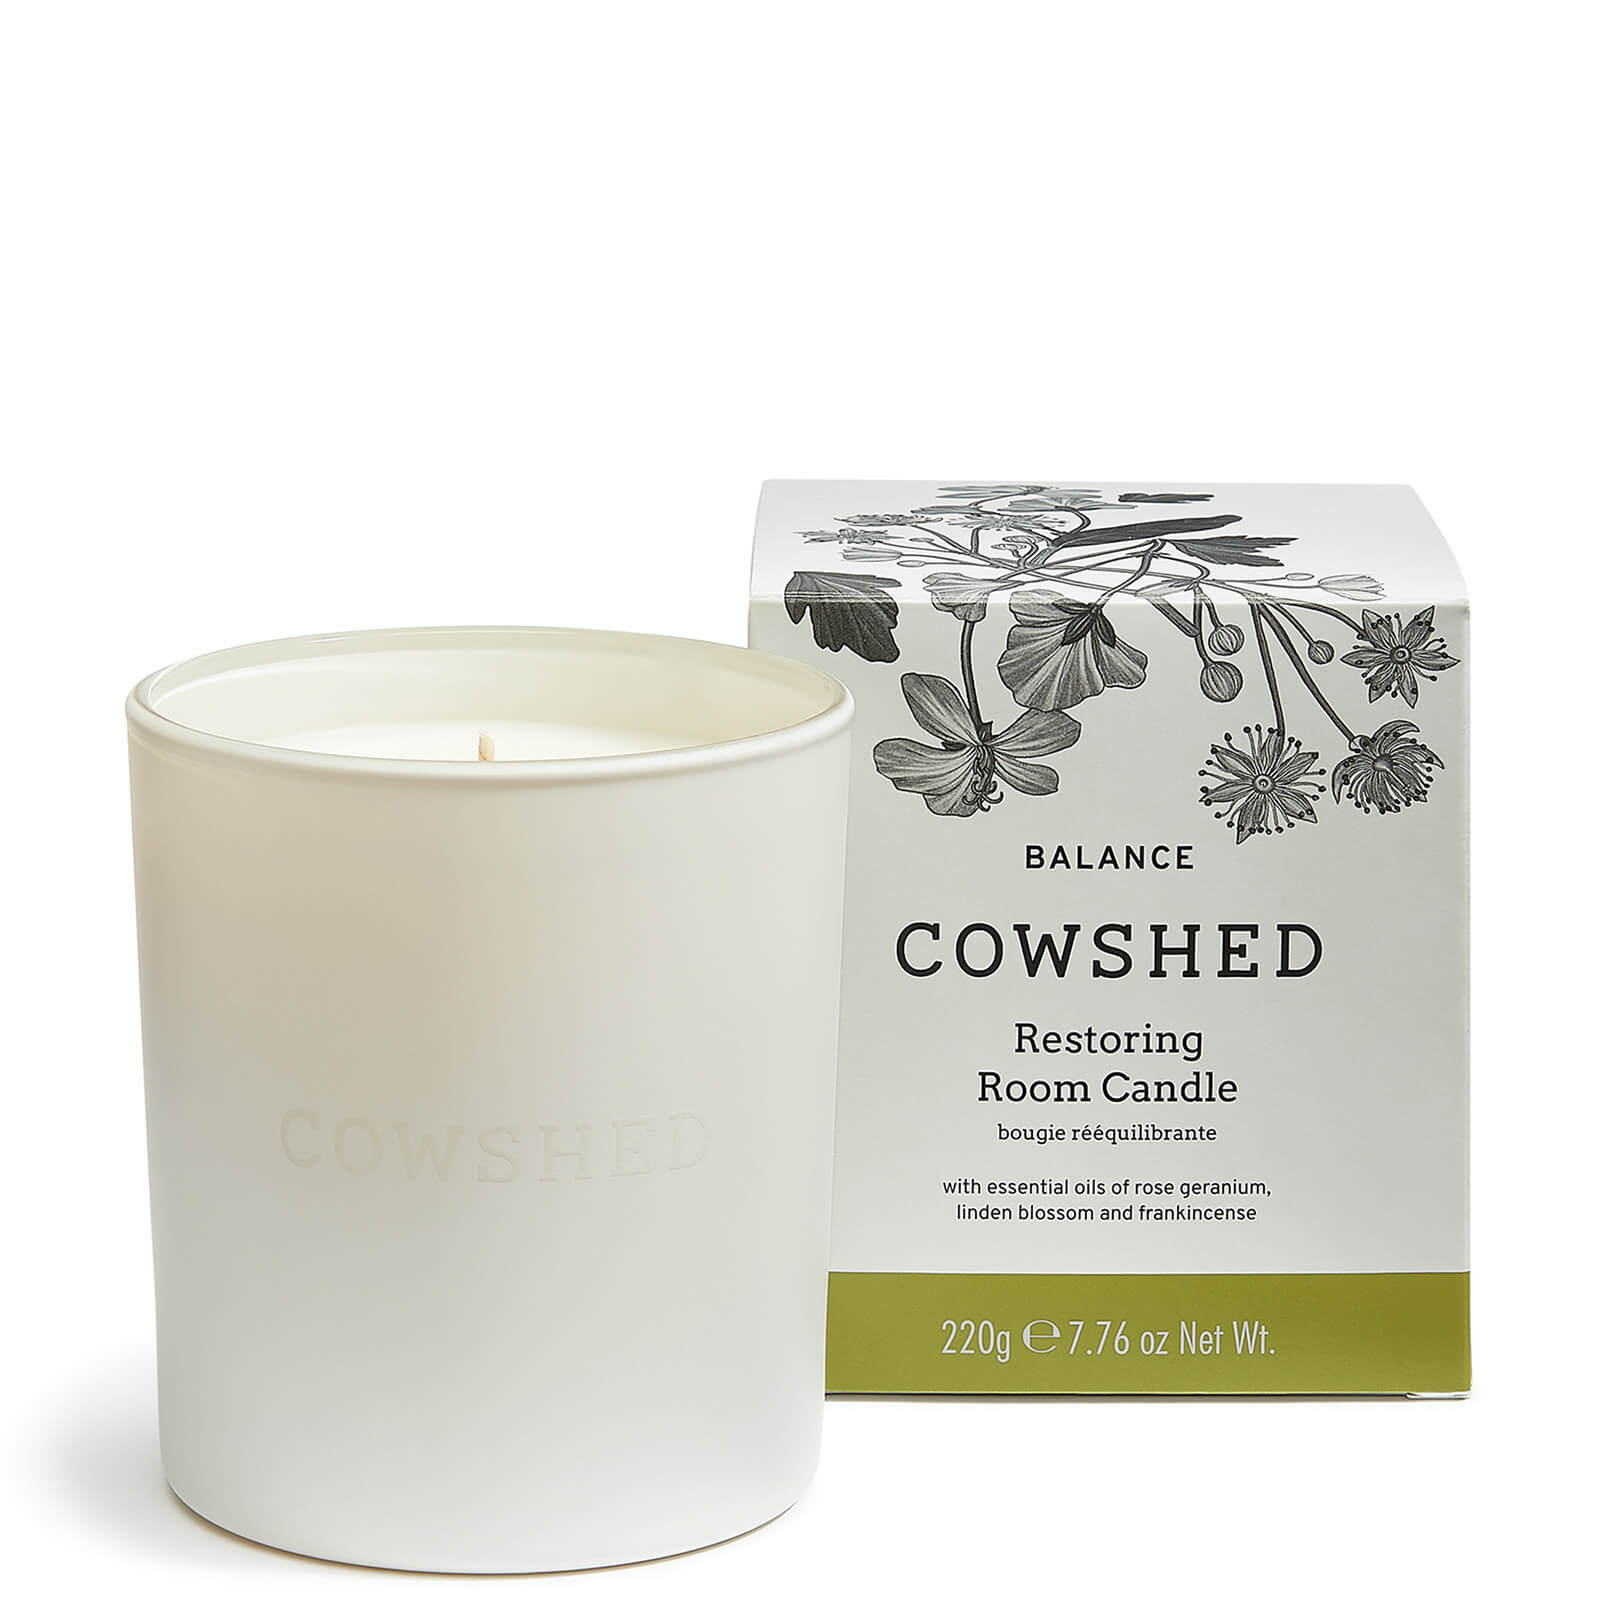 Shop Cowshed Balance Restoring Room Candle